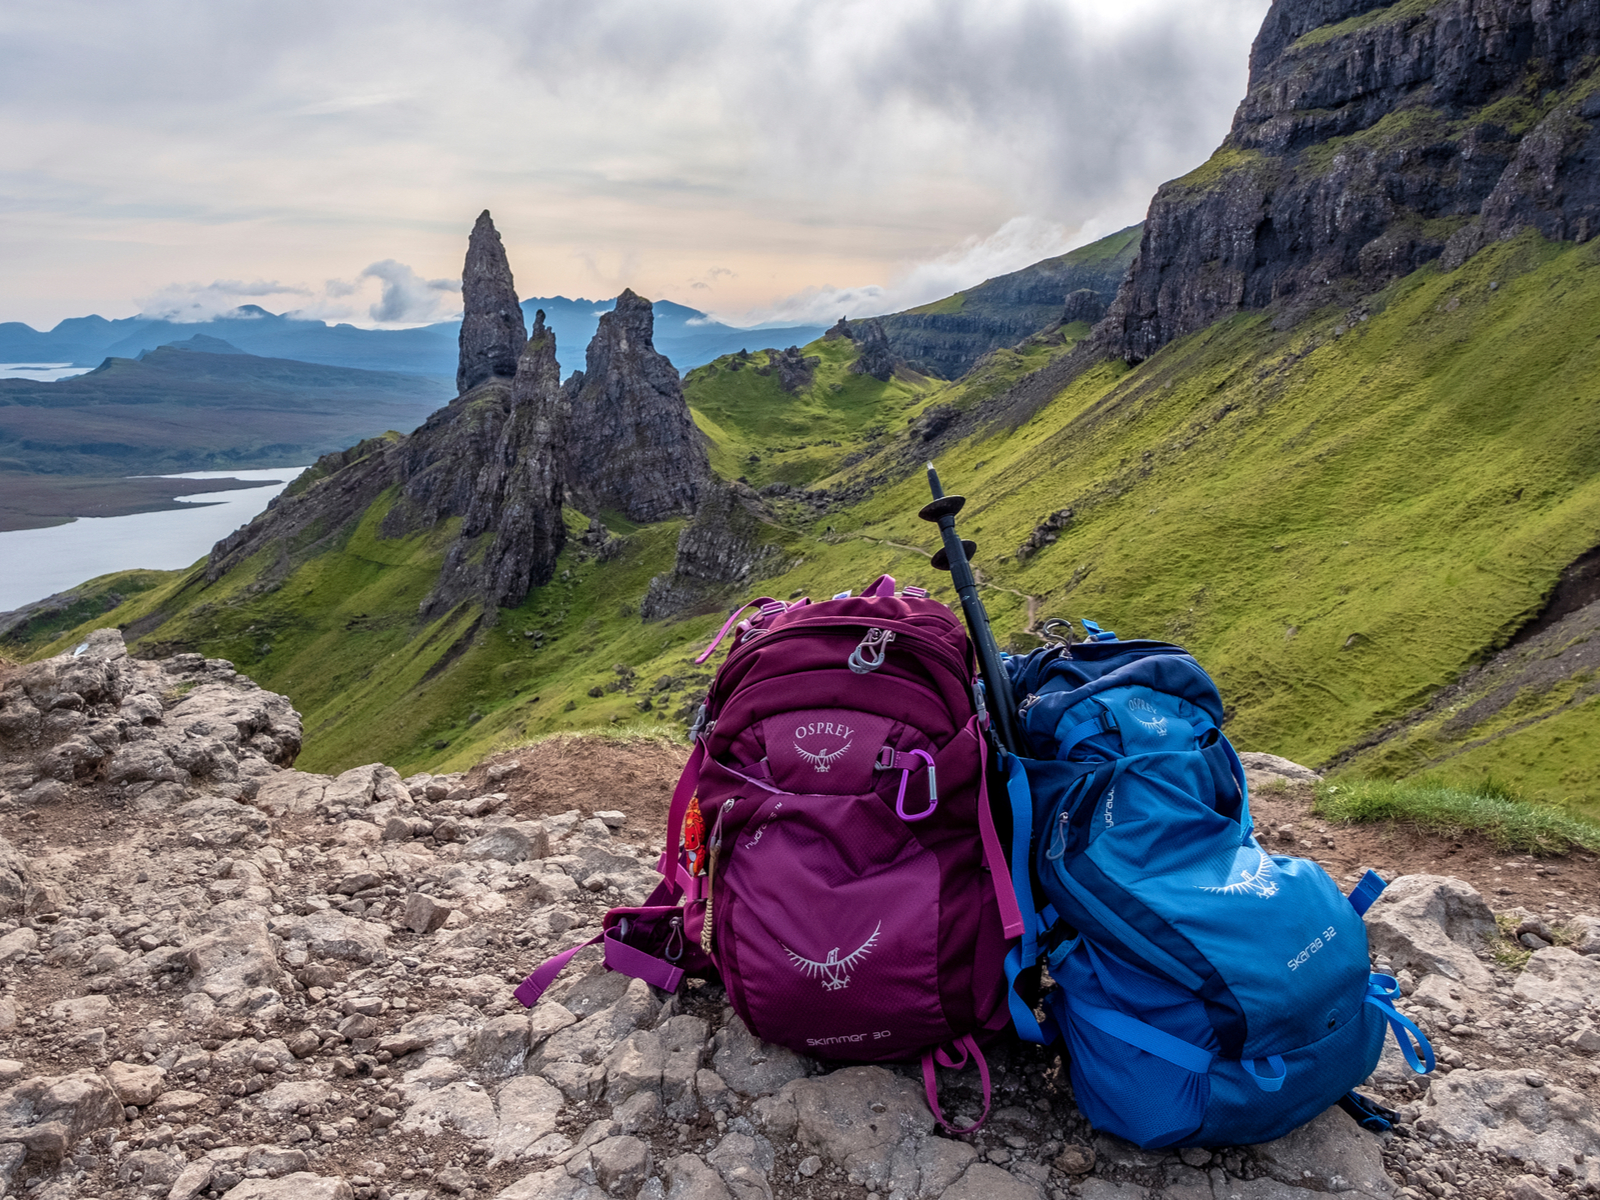 Two of the best Osprey backpacks pictured on a rocks next to a rolling grass hill at the Isle of Skye, Scotland